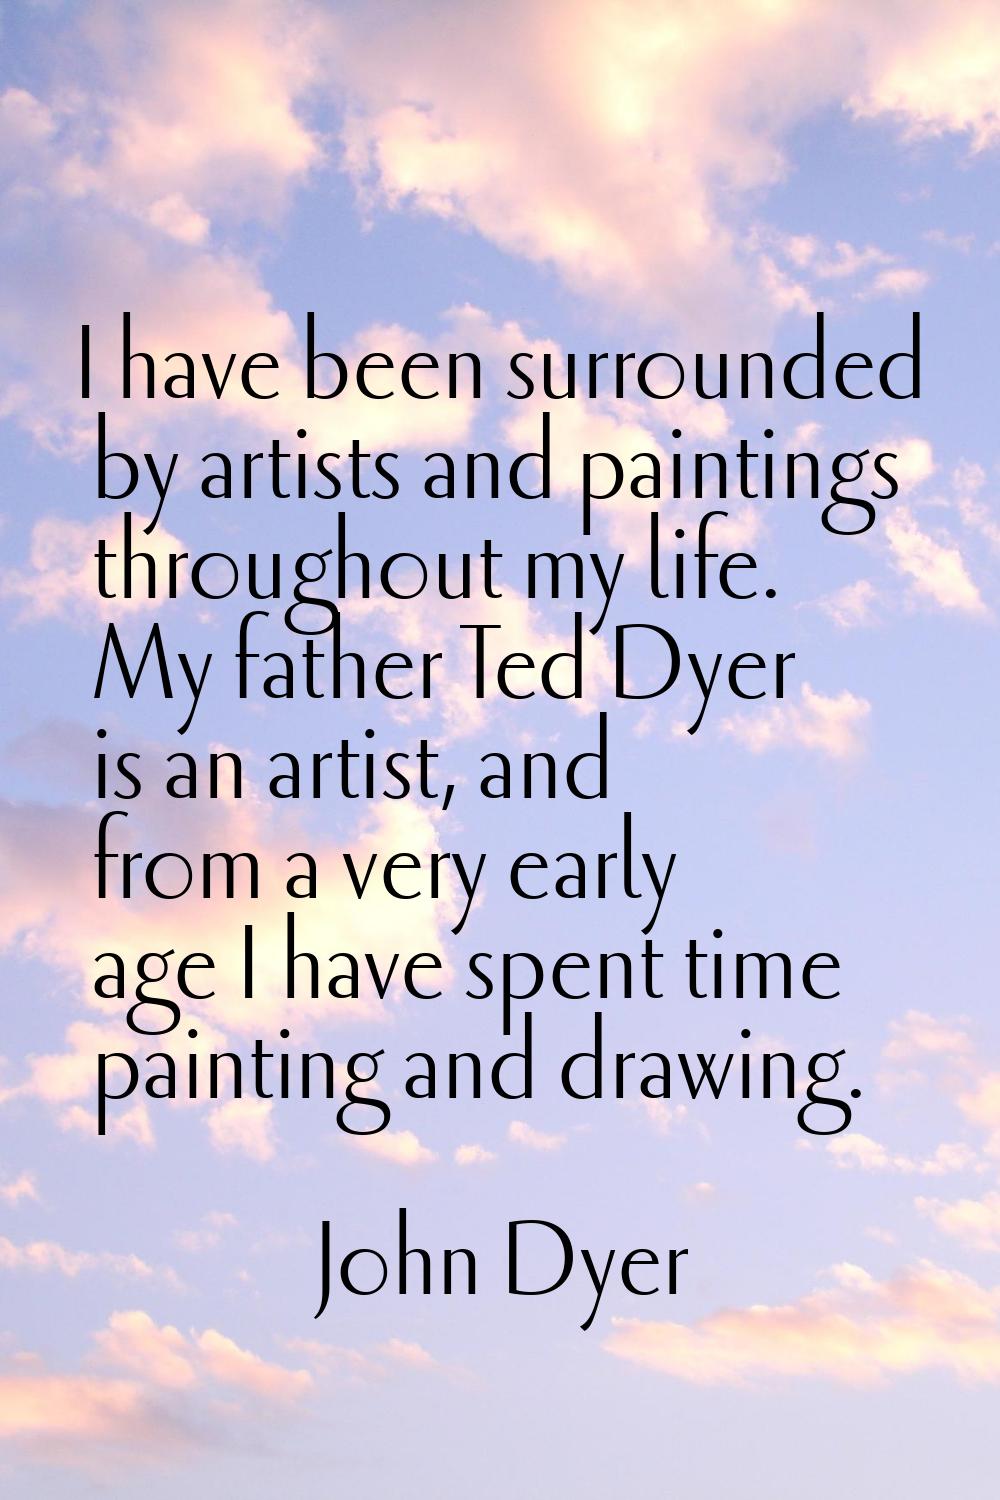 I have been surrounded by artists and paintings throughout my life. My father Ted Dyer is an artist